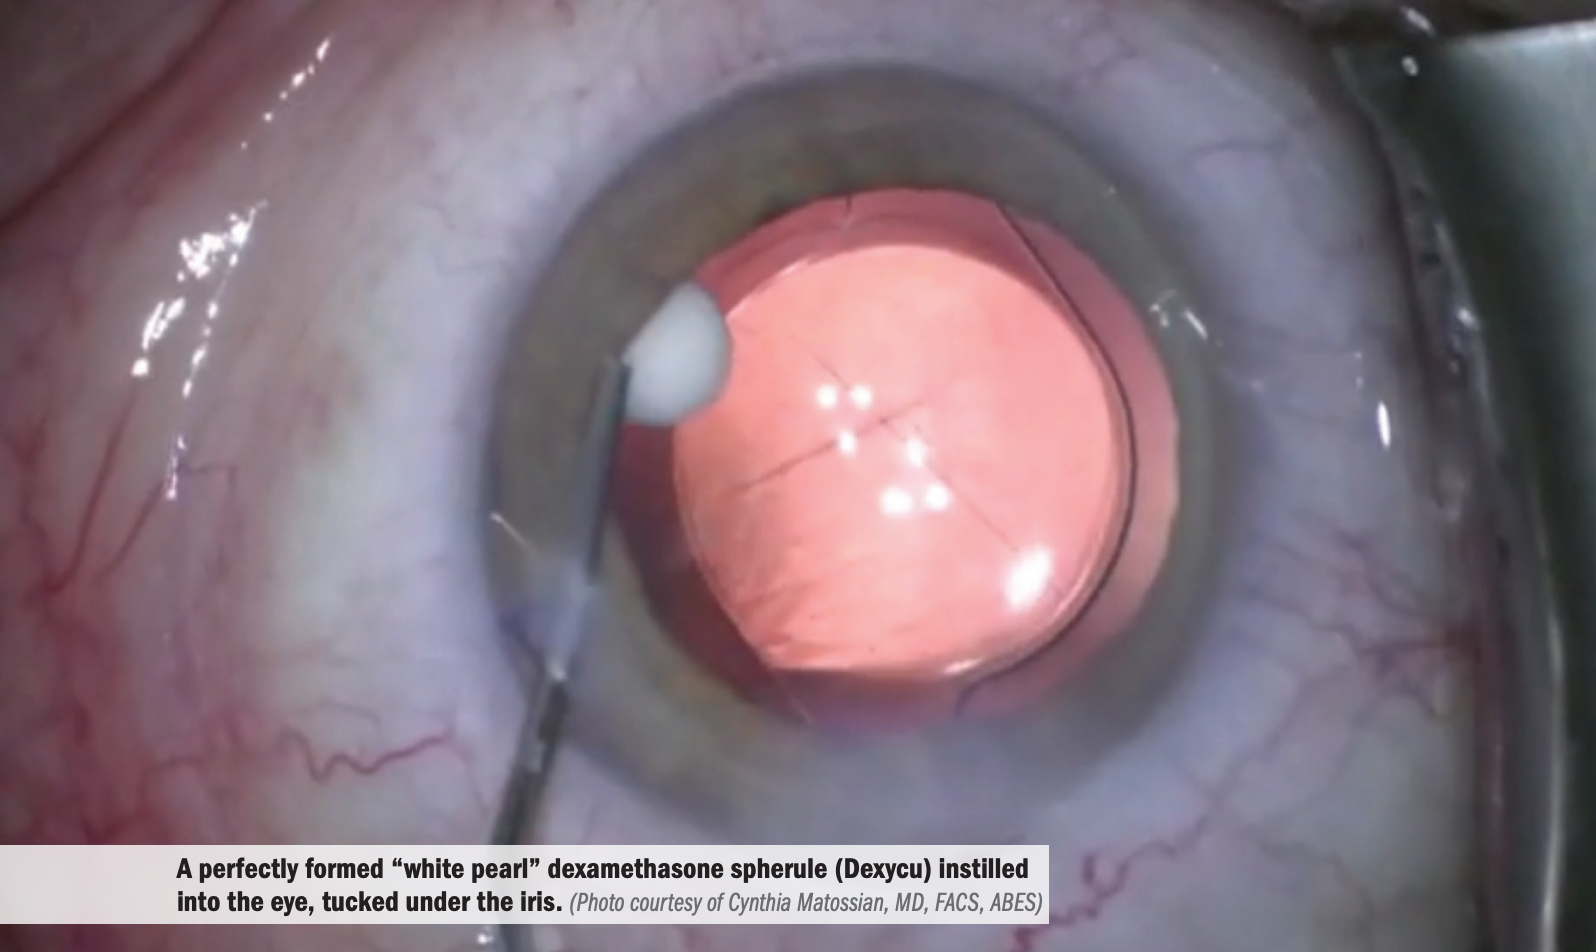 Challenges to topical drop adherence after cataract surgery